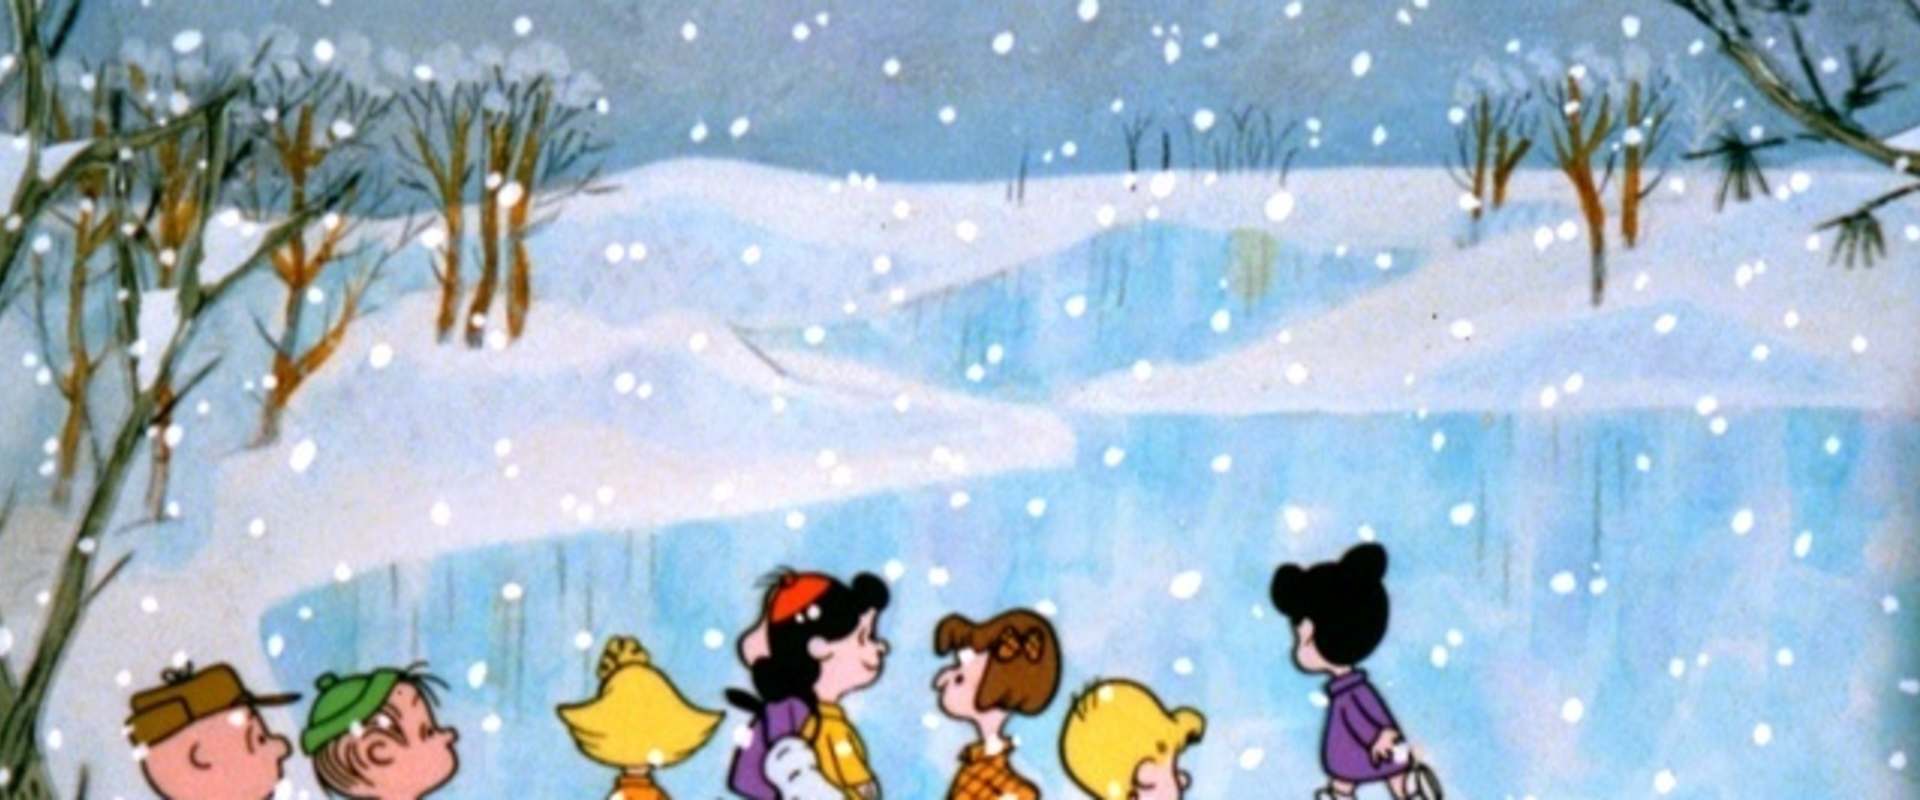 A Charlie Brown Christmas background 1